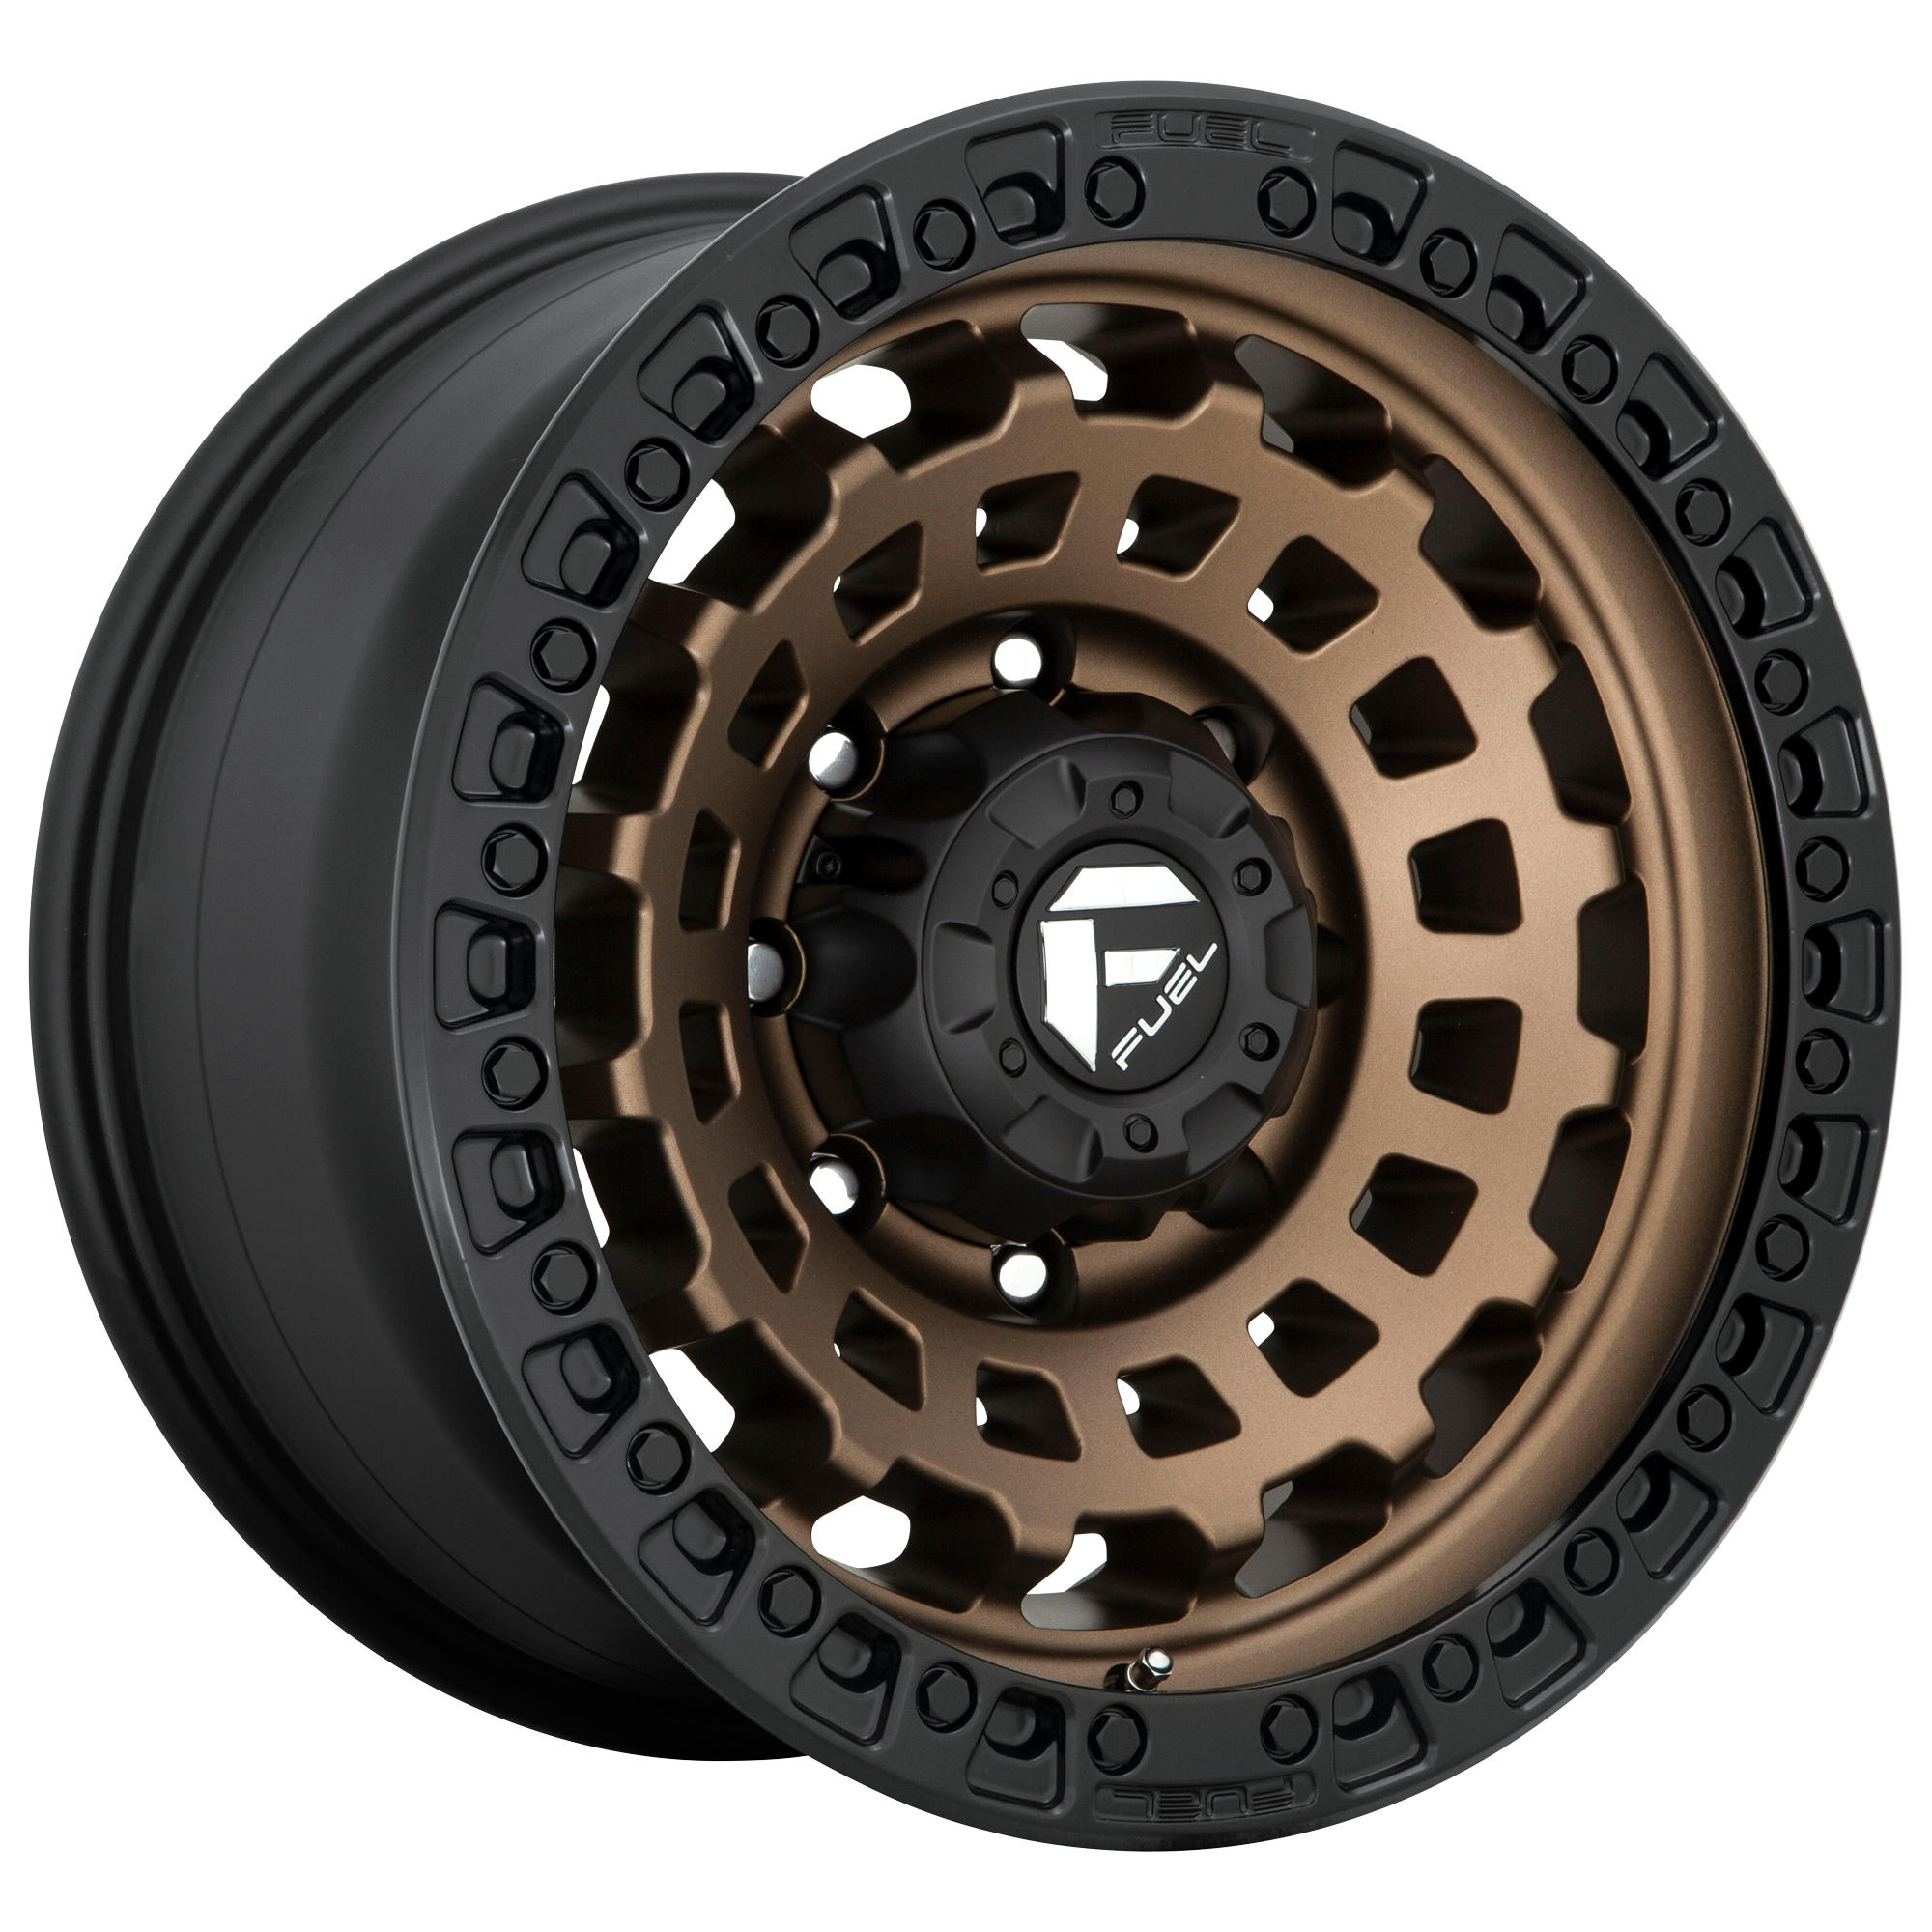 ZEPHYR 18x9 6x135.00 MATTE BRONZE BLACK BEAD RING (-12 mm) - Tires and Engine Performance